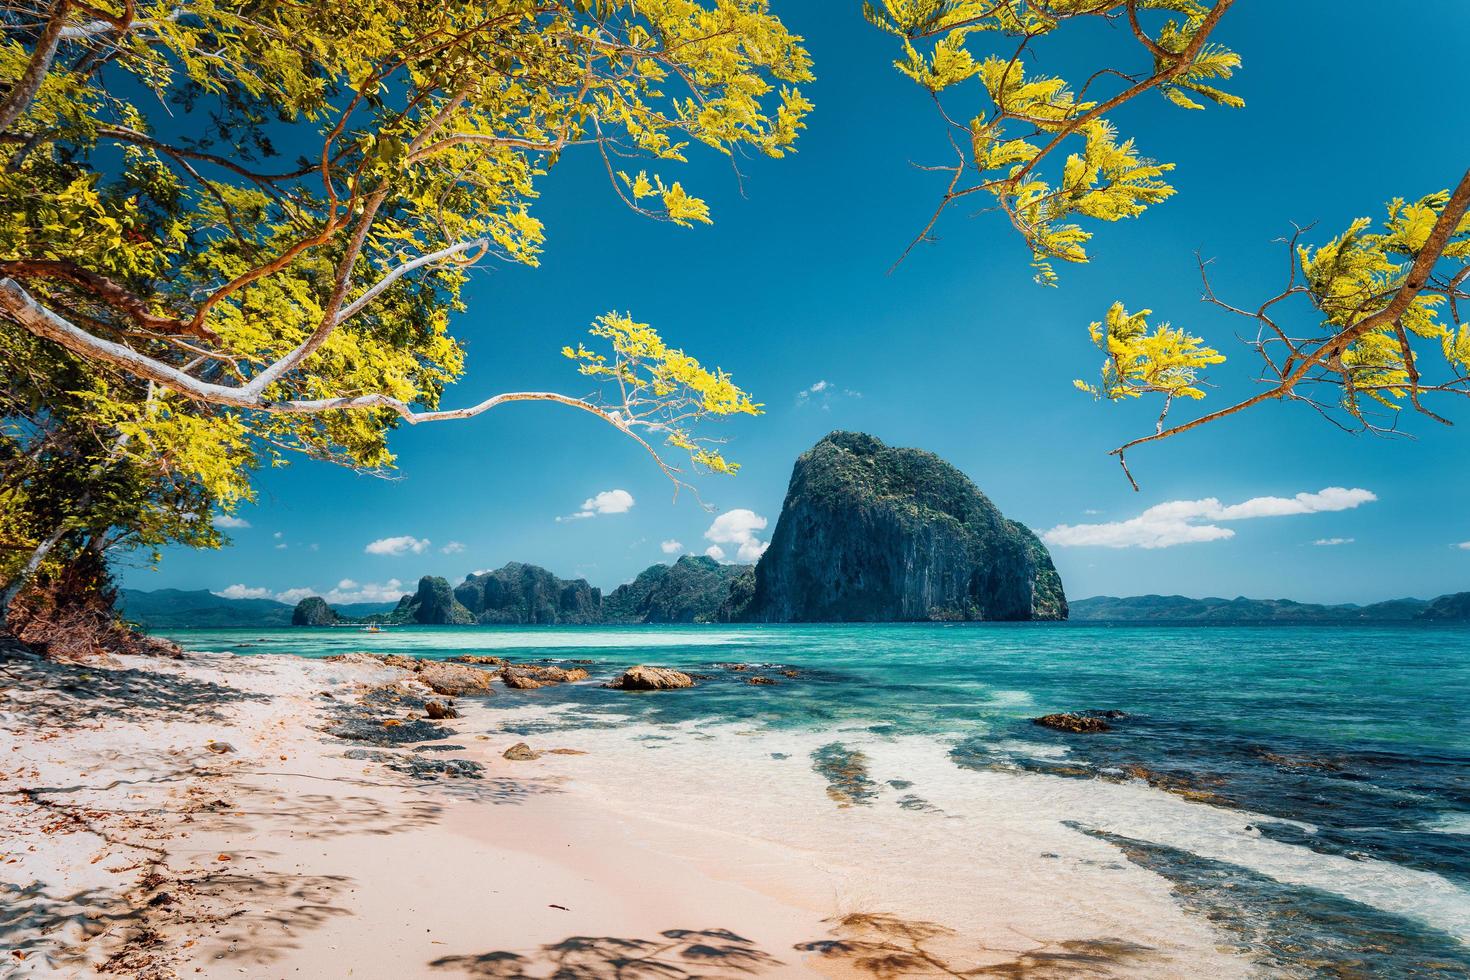 Beautiful landscape scenery of El Nido coastline. Unique amazing Pinagbuyutan island in background framed by tree branches. Palawan, Philippines photo